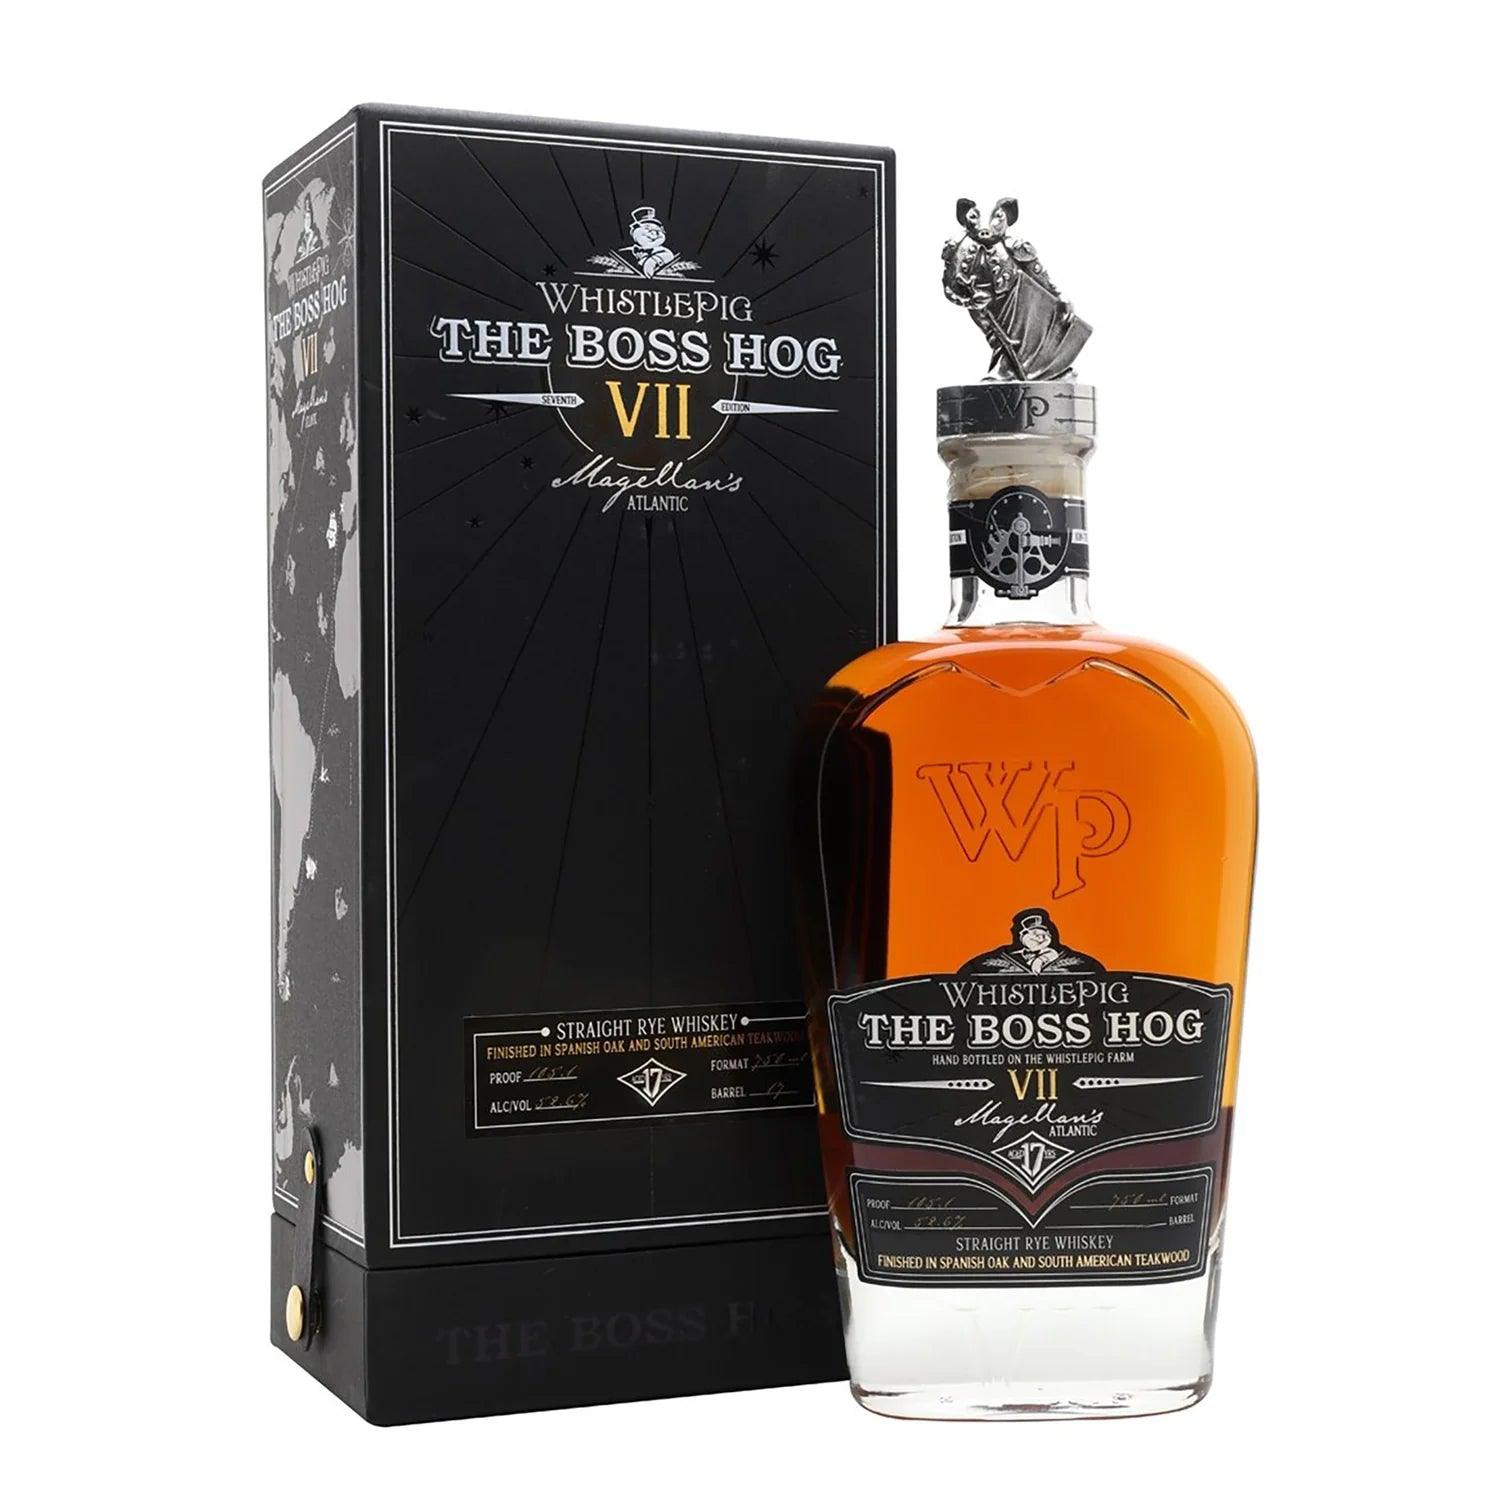 Whistle Pig The Boss Hog Magellan's Atlantic 17 Year Old Cask Strength Rye Whiskey (750ml) - Seventh Edition - Booze House